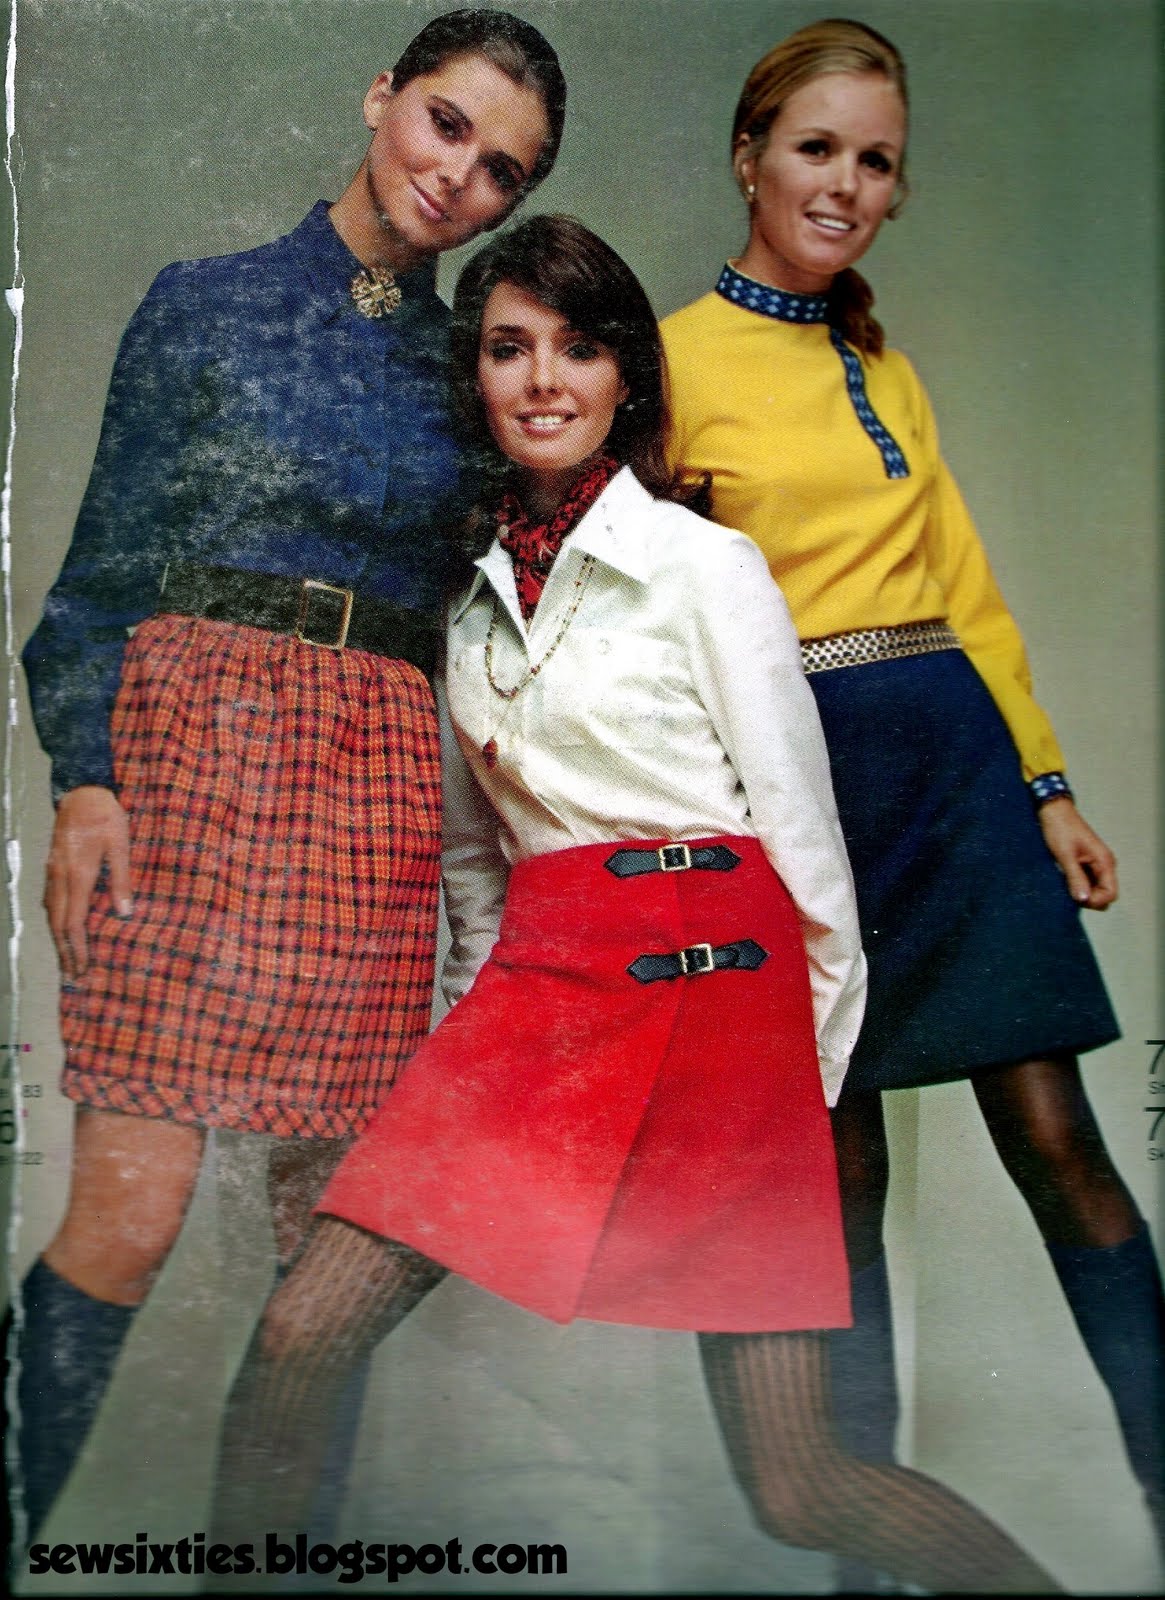 Sew Sixties: Women in Mini-Skirts from Late 60's Simplicity Catalog